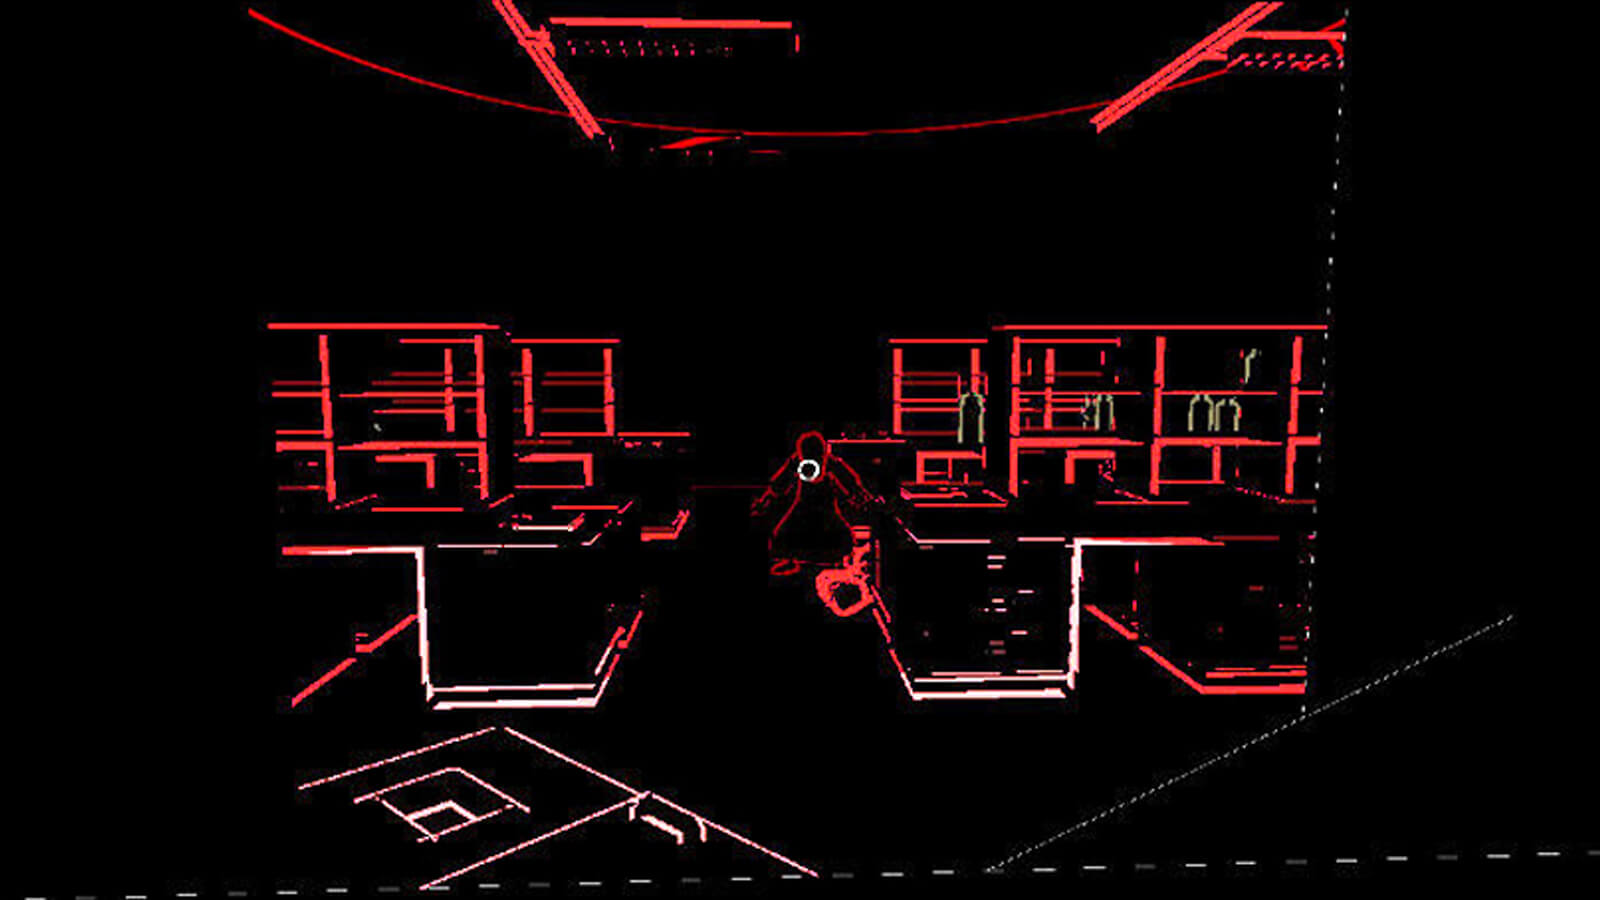 Deprived of sight, the player's perspective is seen in black or red relief. A crouching figure stands between desks